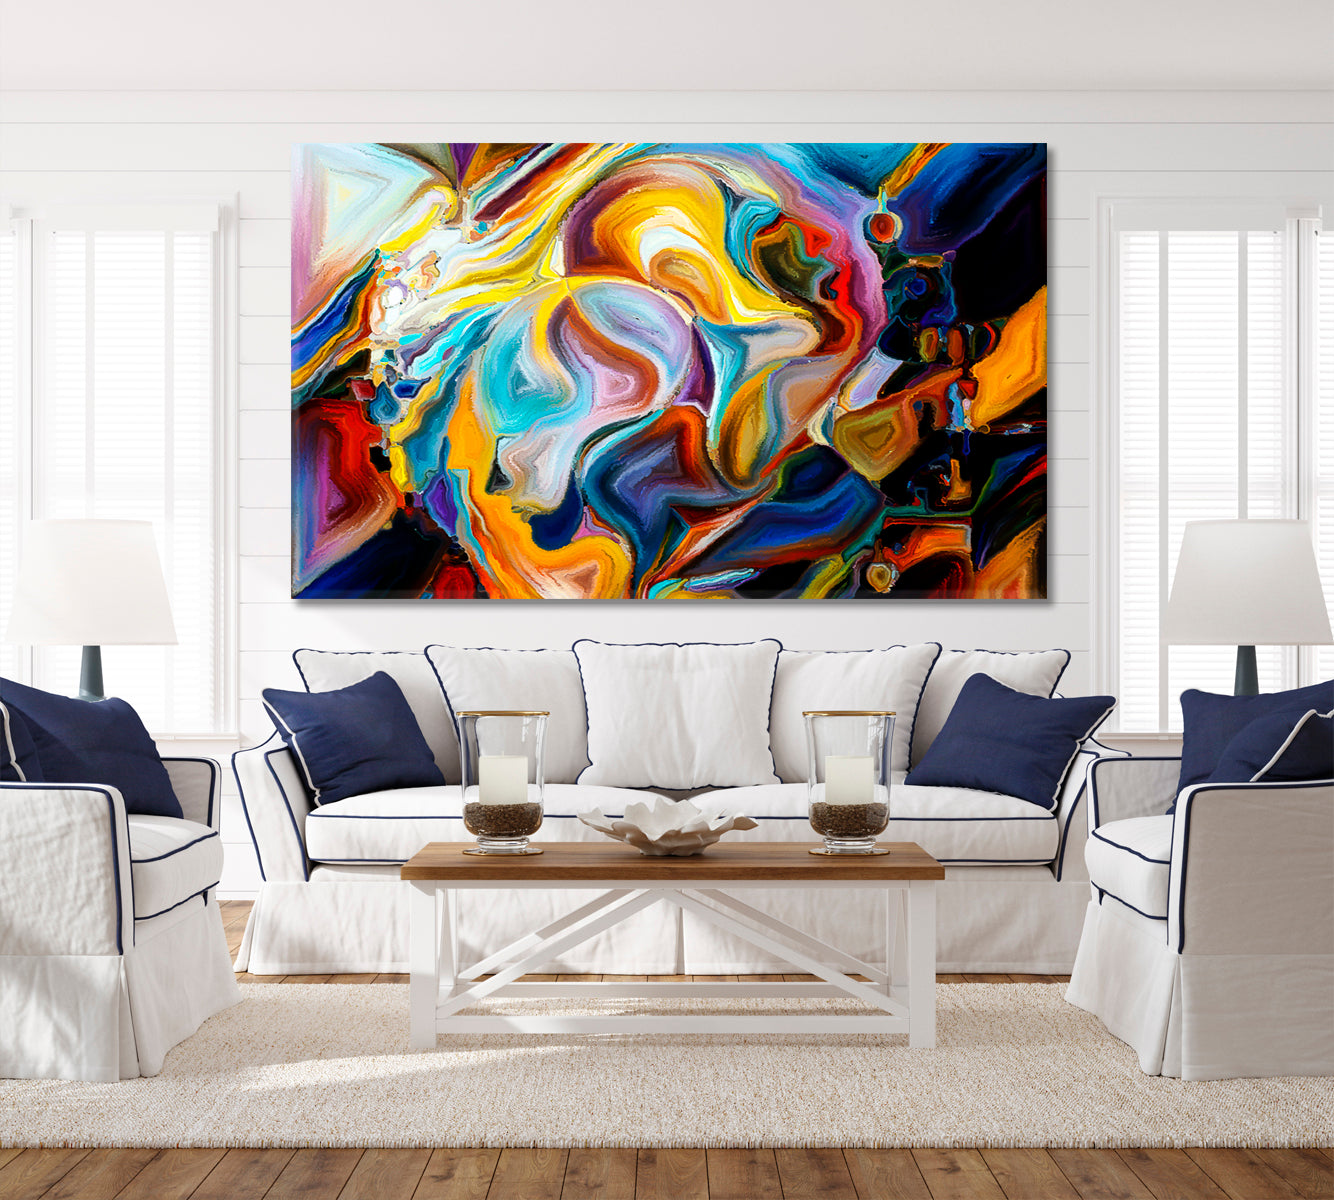 Mysticism Internal Reality Abstract Design Abstract Art Print Artesty 1 panel 24" x 16" 